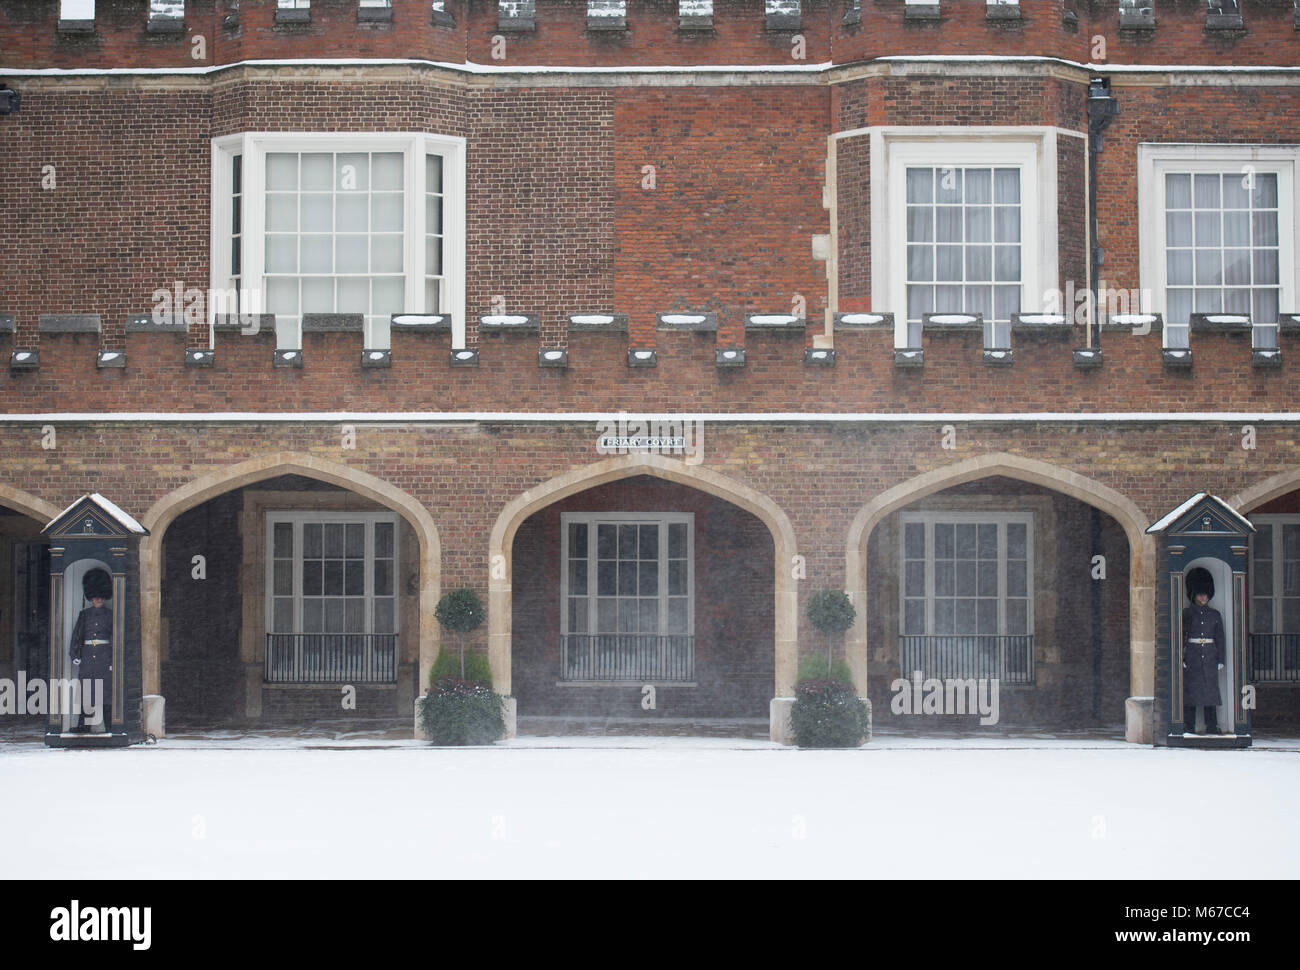 St James’s Palace, London, UK. 1 March 2018. After overnight snow continuing into morning rush-hour, an Arctic wind empties London’s tourist haunts. Guardsmen on sentry duty with wind blown snow. Credit: Malcolm Park/Alamy Live News. Stock Photo